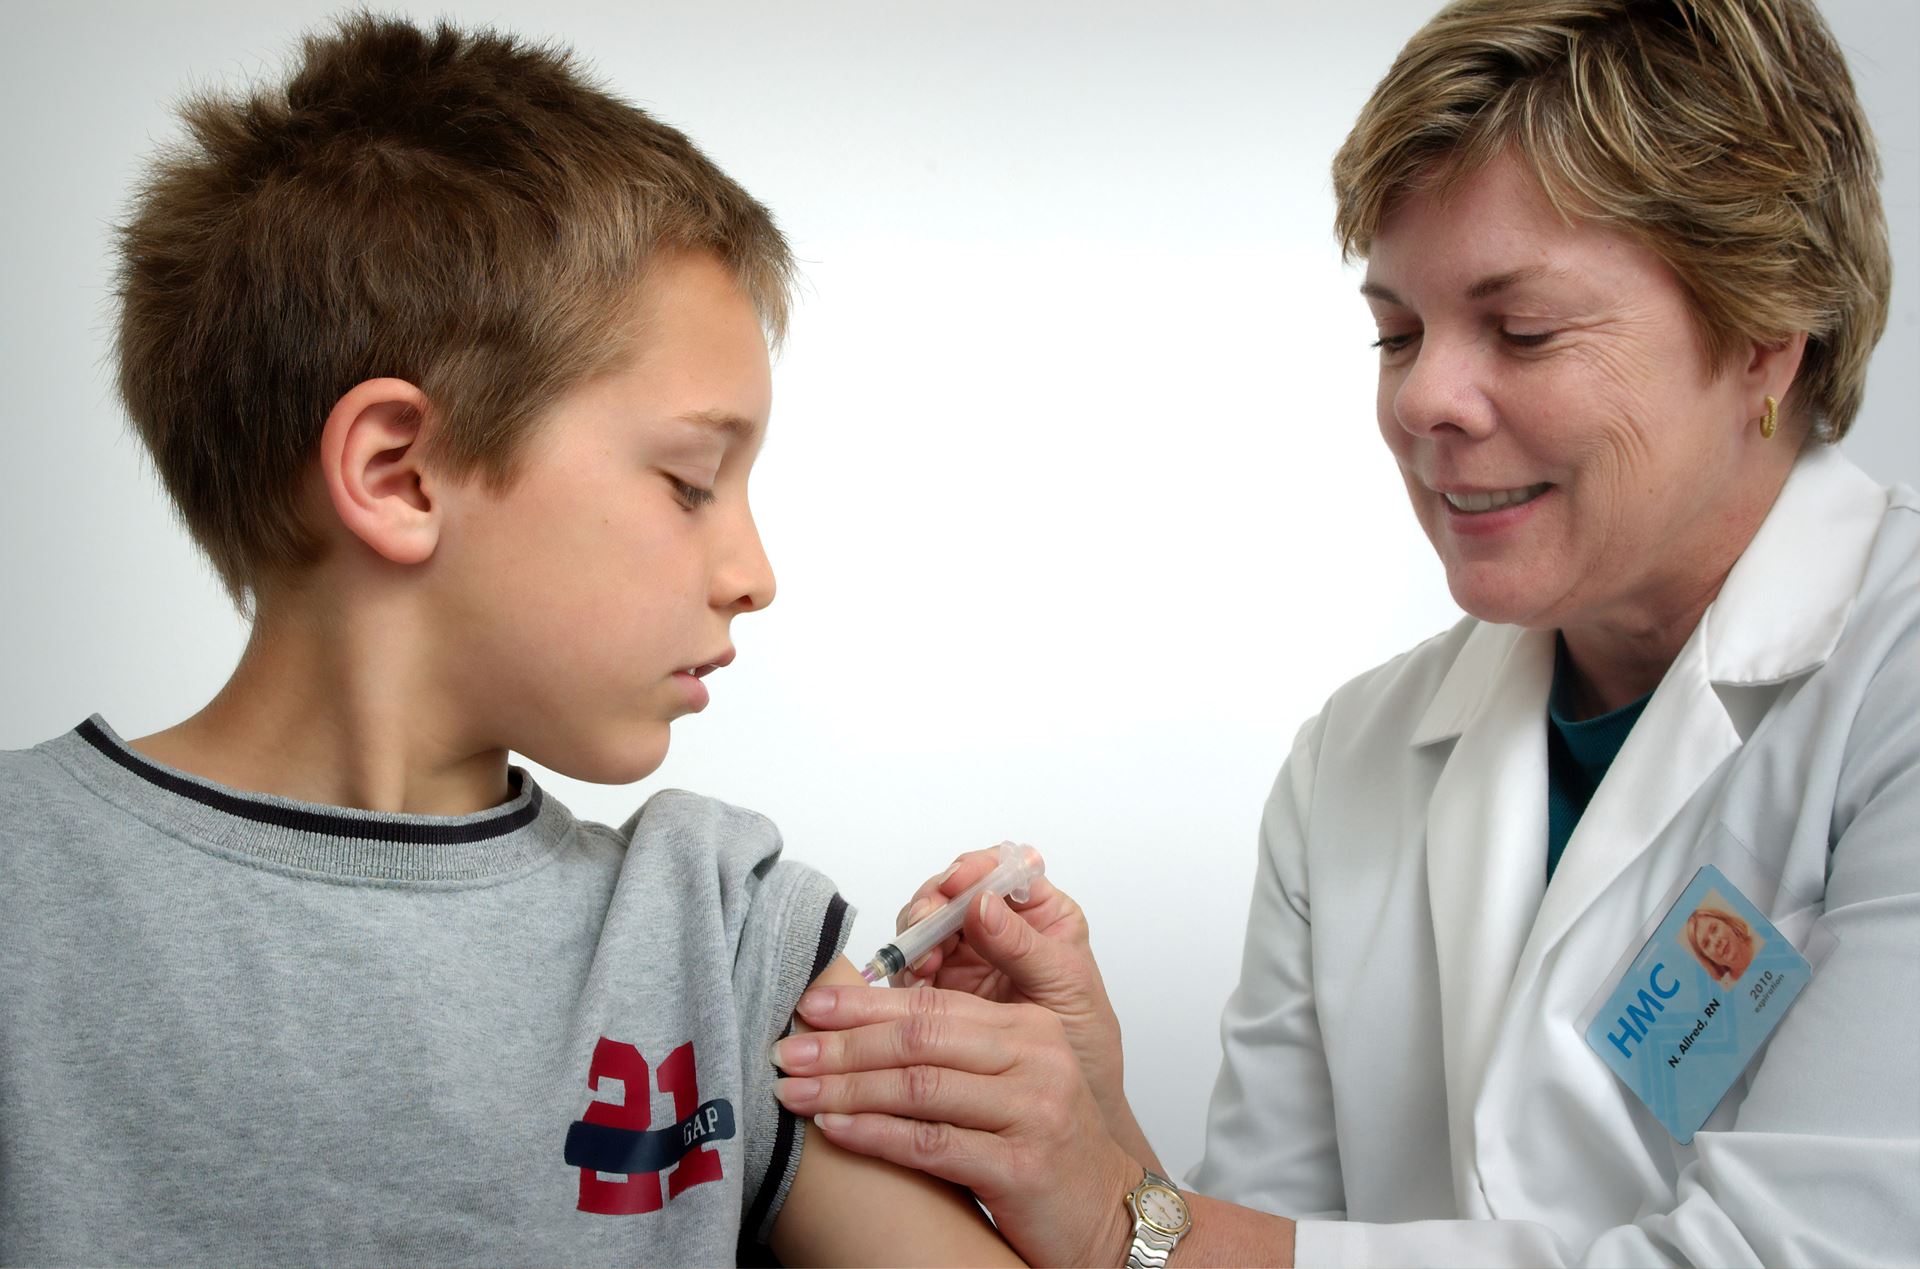 a child being vaccinated